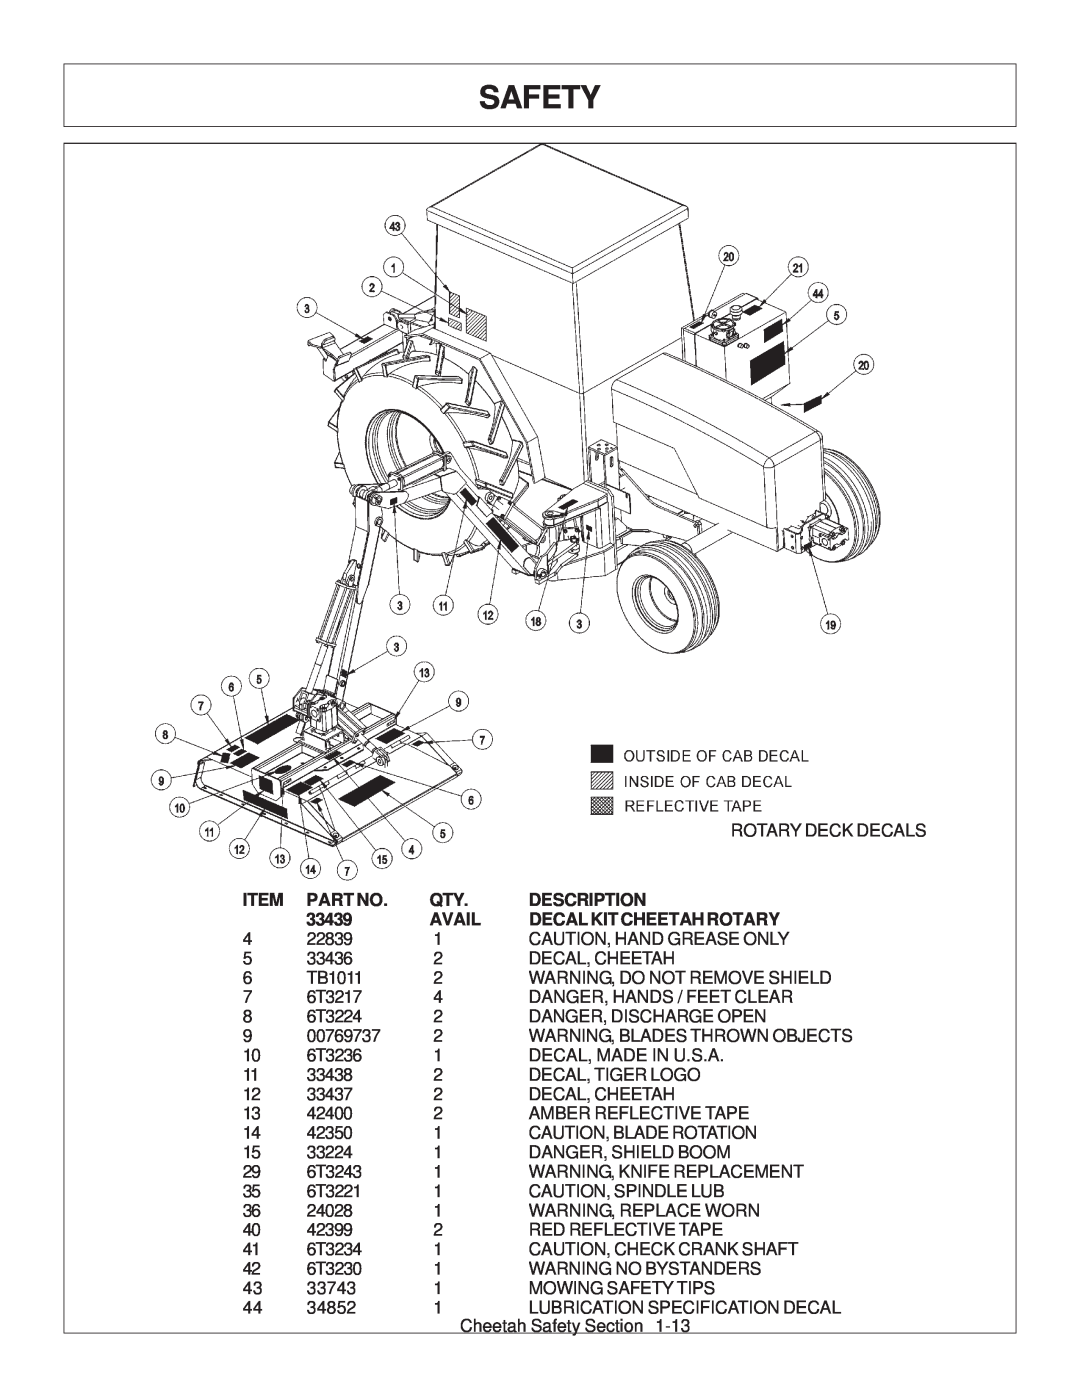 Tiger Products Co., Ltd JD 5083E, JD 5101E, JD 5093E manual Safety, Rotary Deck Decals 